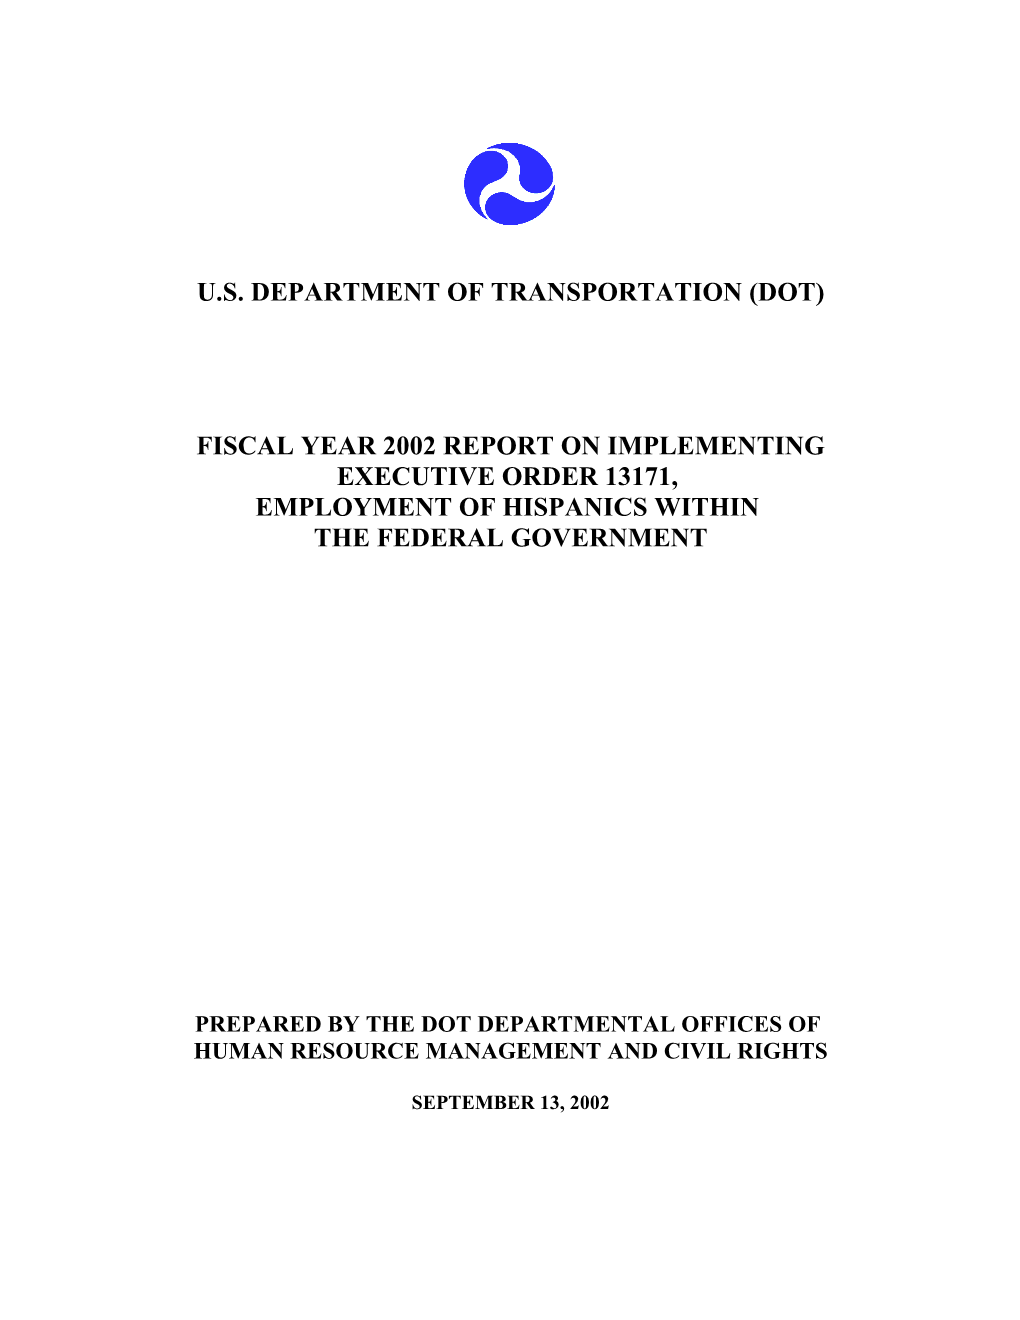 Fiscal Year 2002 Report on Implementing